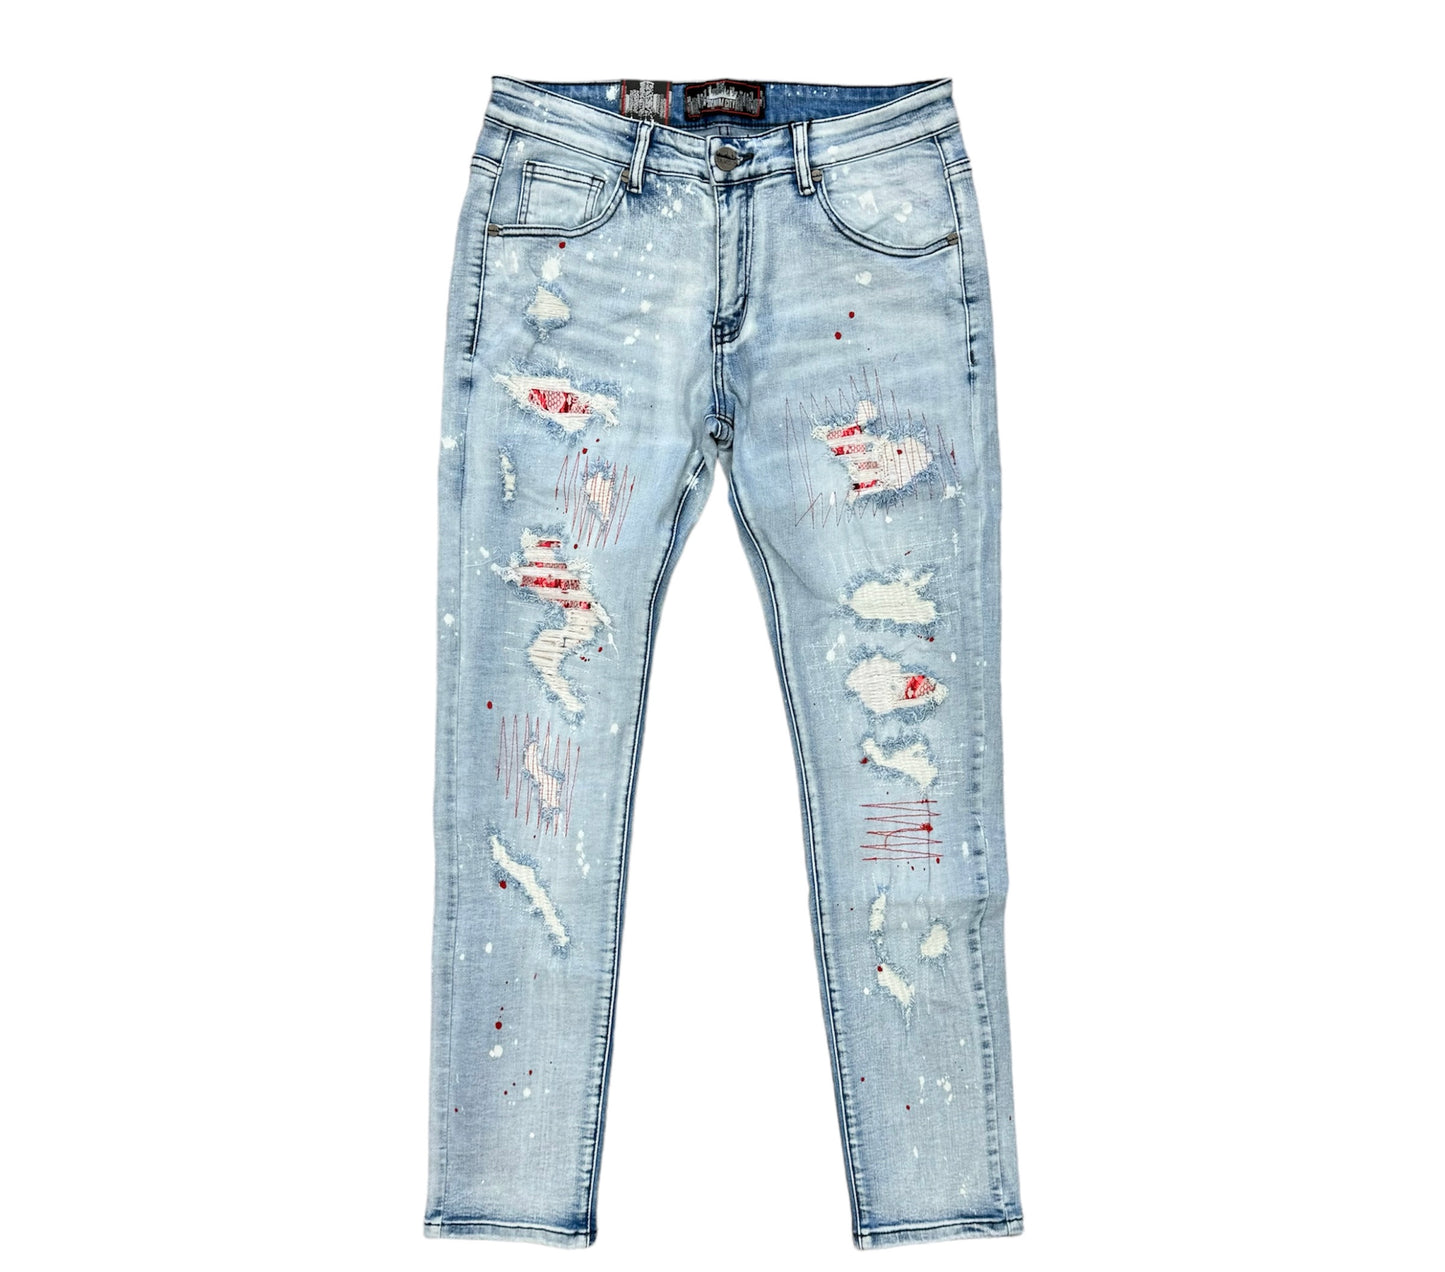 DenimiCity Rip Repair Bleached LT.Blue Wash With Red Snake Stitch Denim